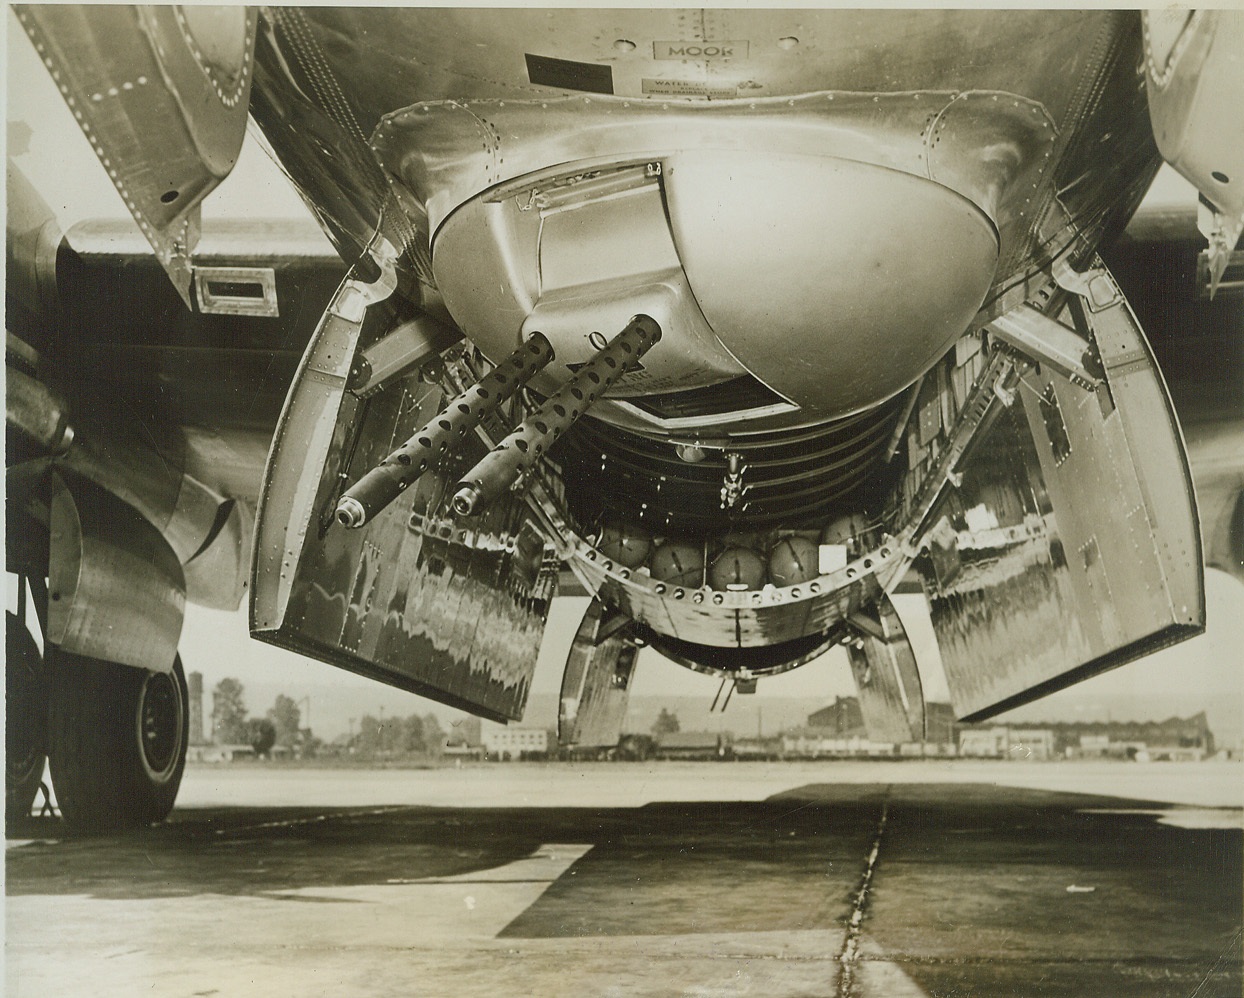 Superfortress Carries Five Gun Turrets, 9/8/1944. For the first time, the gun positions on the Boeing Superfortress are revealed. Five turrets, each with two .50 caliber guns, are placed at strategic positions on the bomber. Here the forward lower turret can be seen, with the two guns, on the under side of the fuselage beneath the pilot's cabin. The bomb bay doors are open. In addition to these guns, the tail turret also mounts a 20mm cannon. All turrets are remotely controlled which makes possible the operation of all guns by gunners in different parts of the bomber. Credit (ACME);